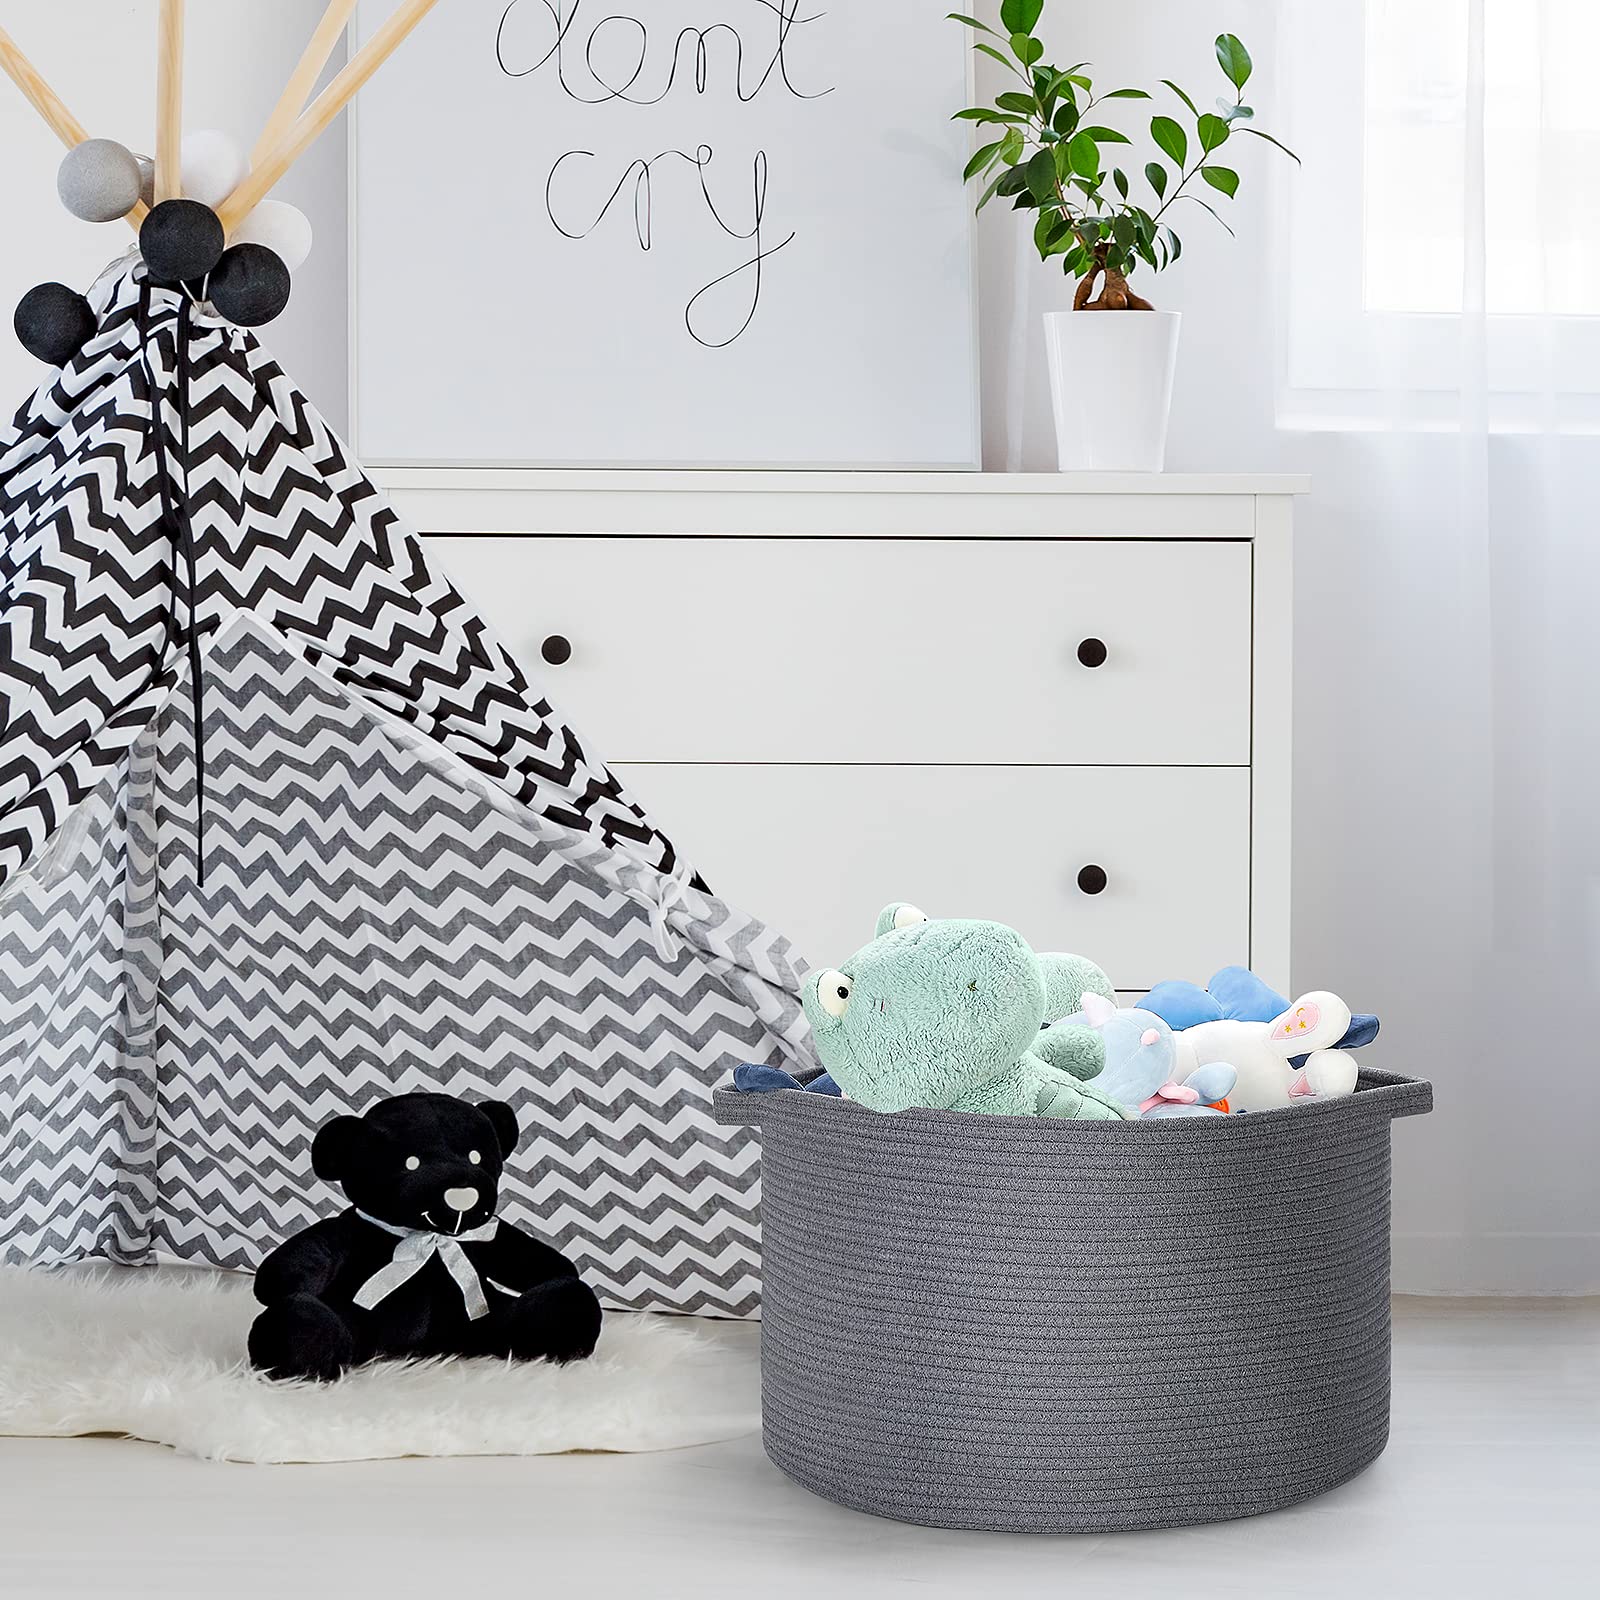 Blanket Basket - 20"x 20"x 13" Cotton Rope Basket for Living Room, Baby Toy Storage Basket, Large Woven Laundry Basket (Gray)